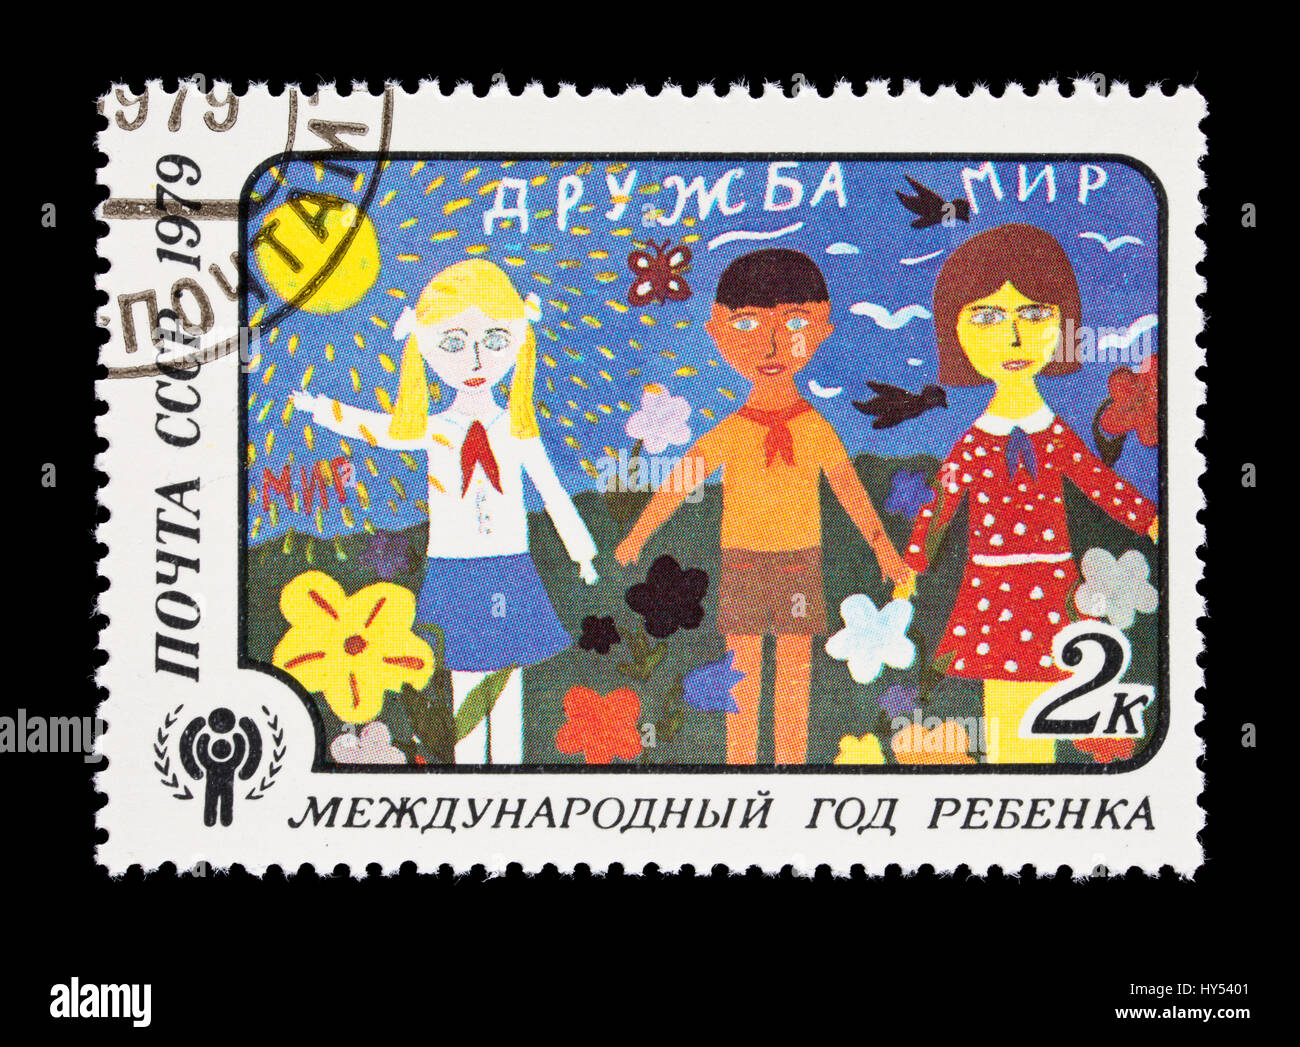 Postage stamp from the Soviet Union depicting friendship (child's drawing), for the International Year of the Child. Stock Photo